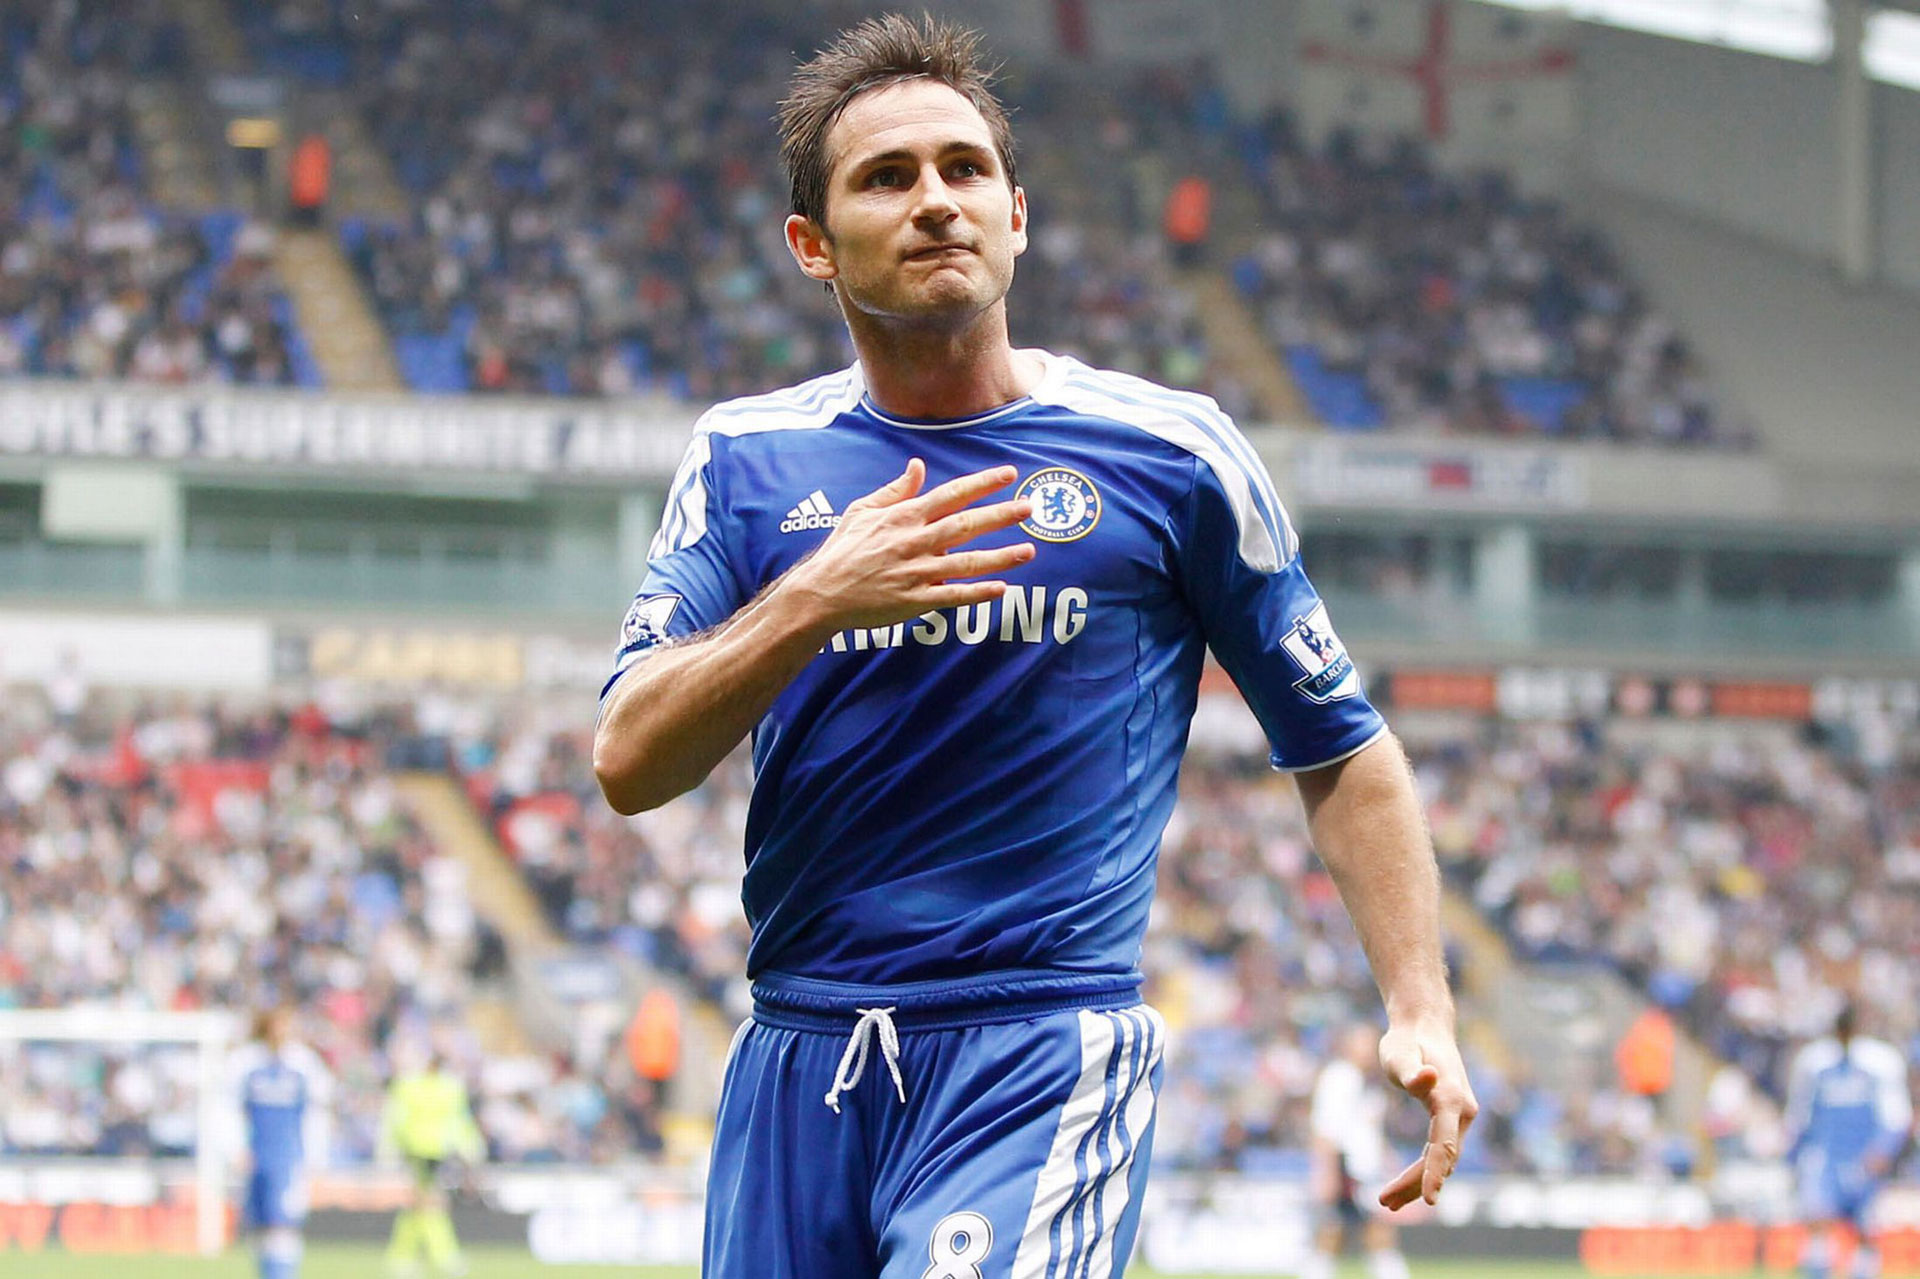 Frank Lampard To Sign For Manchester City On A Month Loan